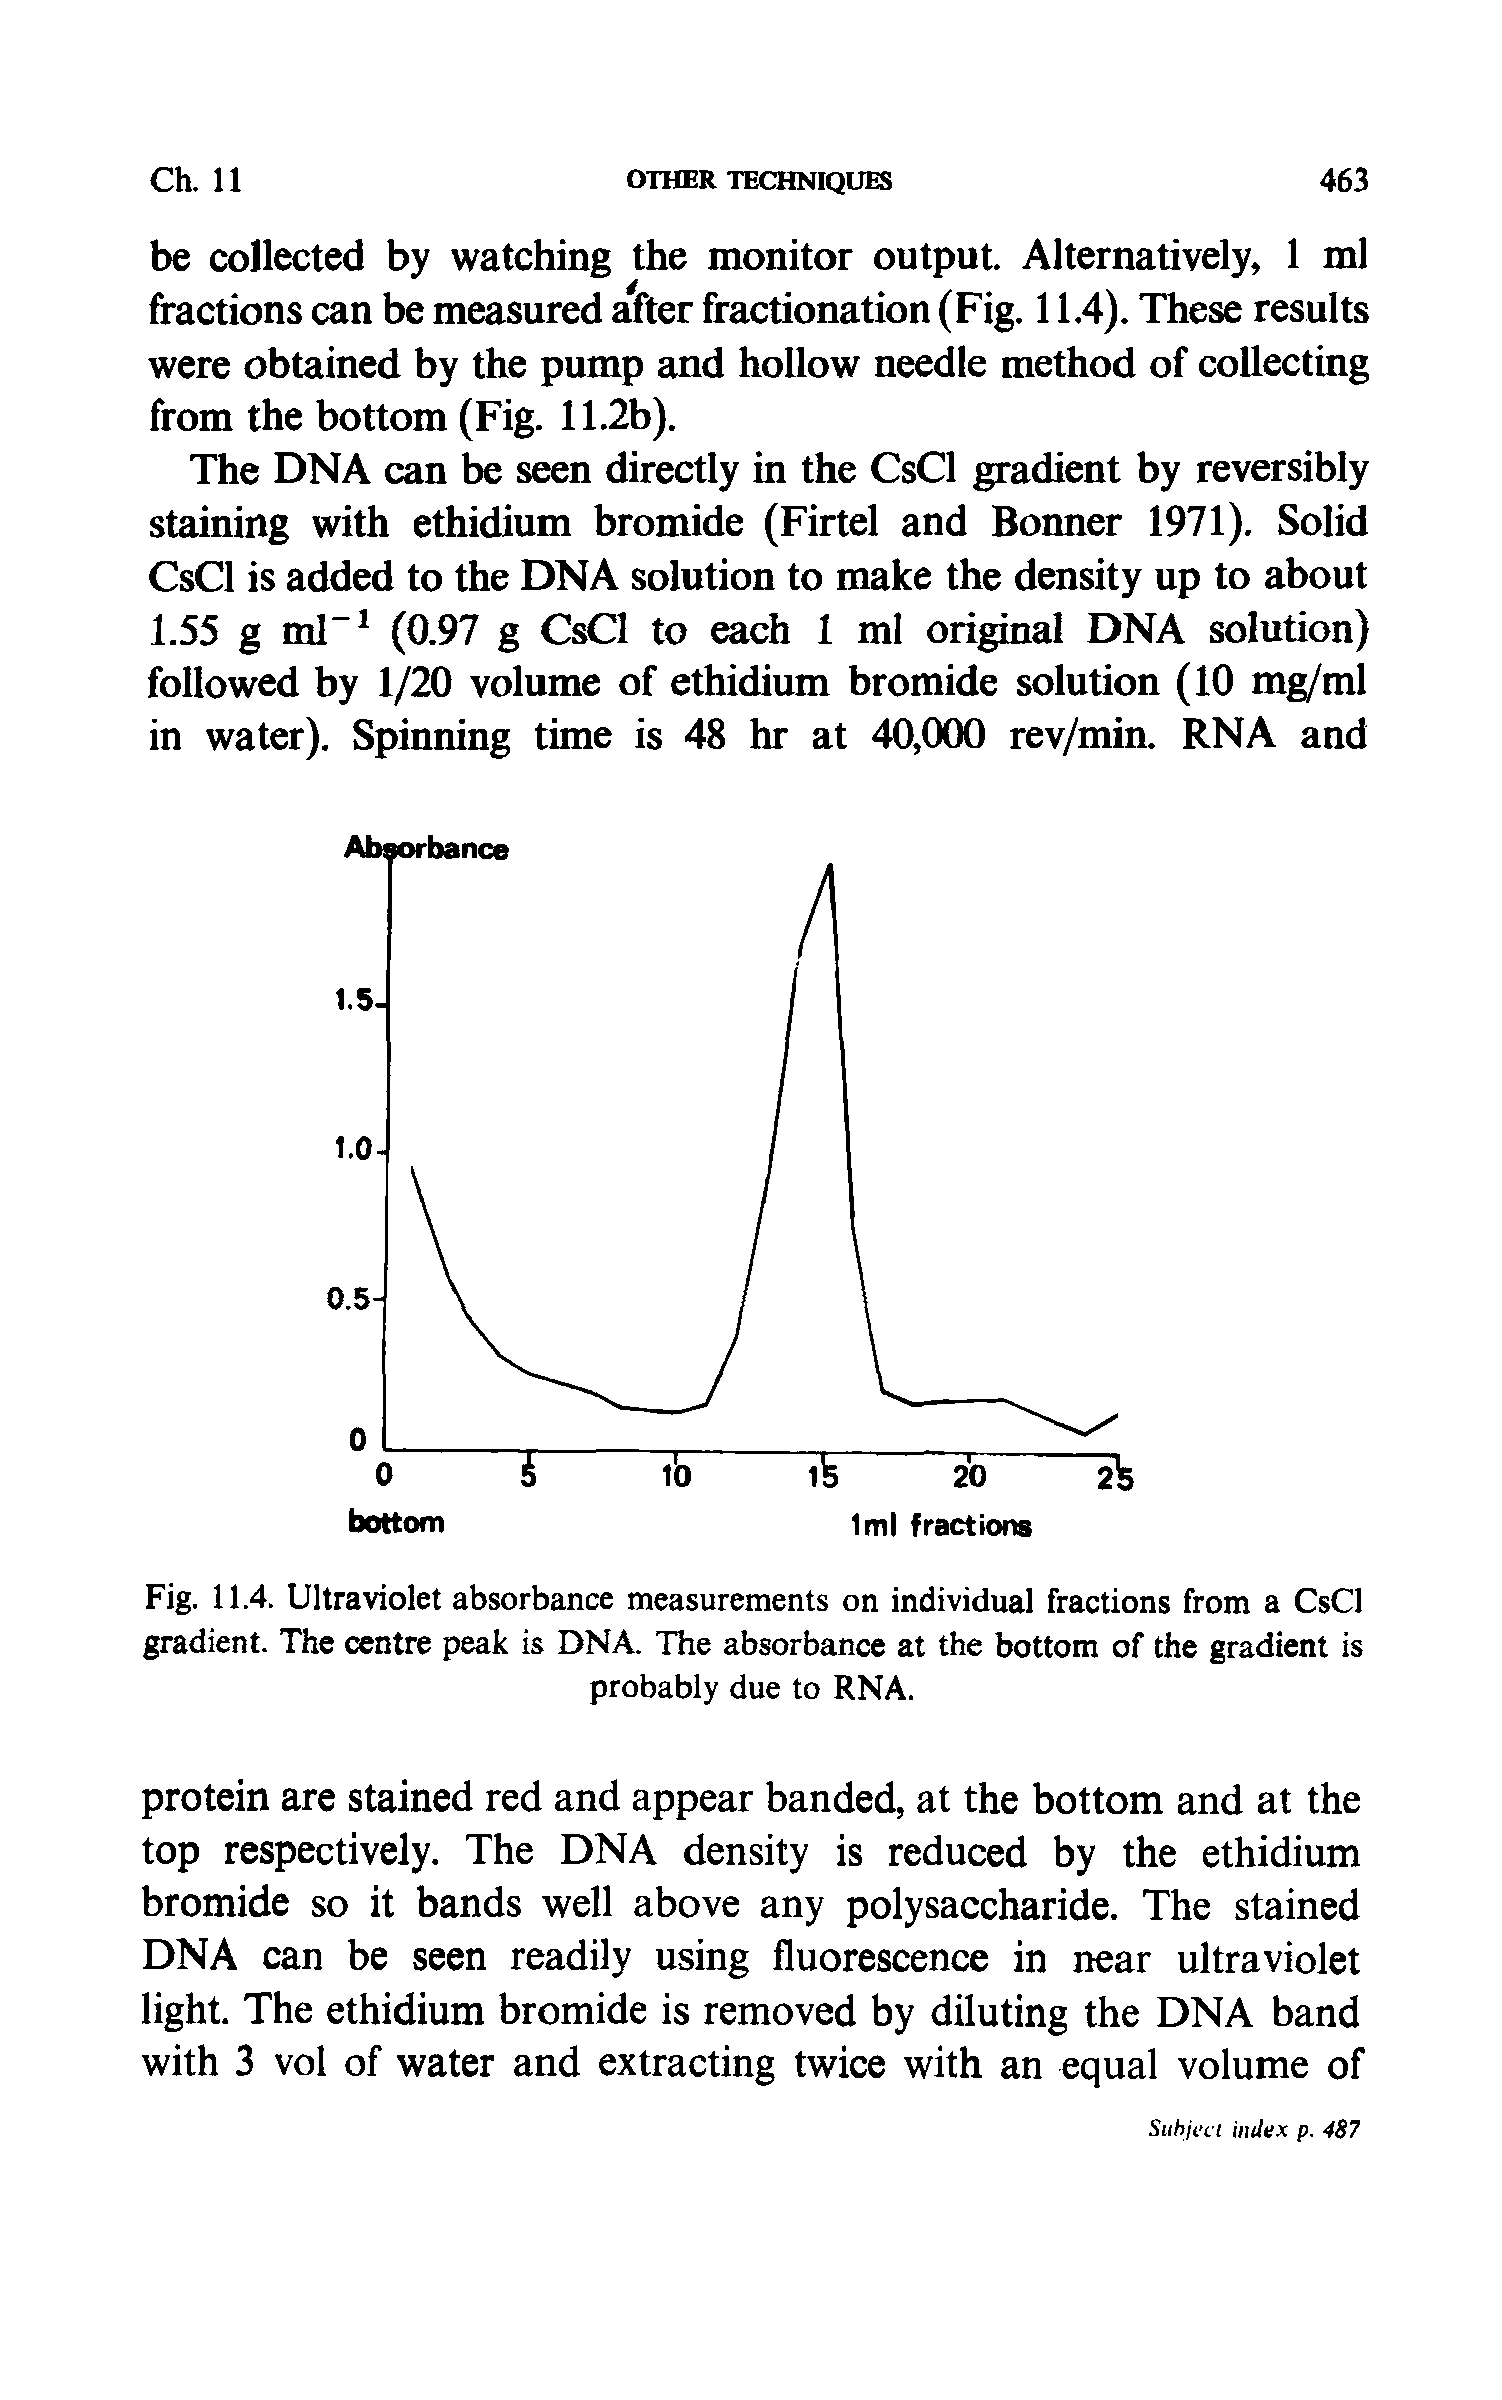 Fig. 11.4. Ultraviolet absorbance measurements on individual fractions from a CsCl gradient. The centre peak is DNA. The absorbance at the bottom of the gradient is probably due to RNA.